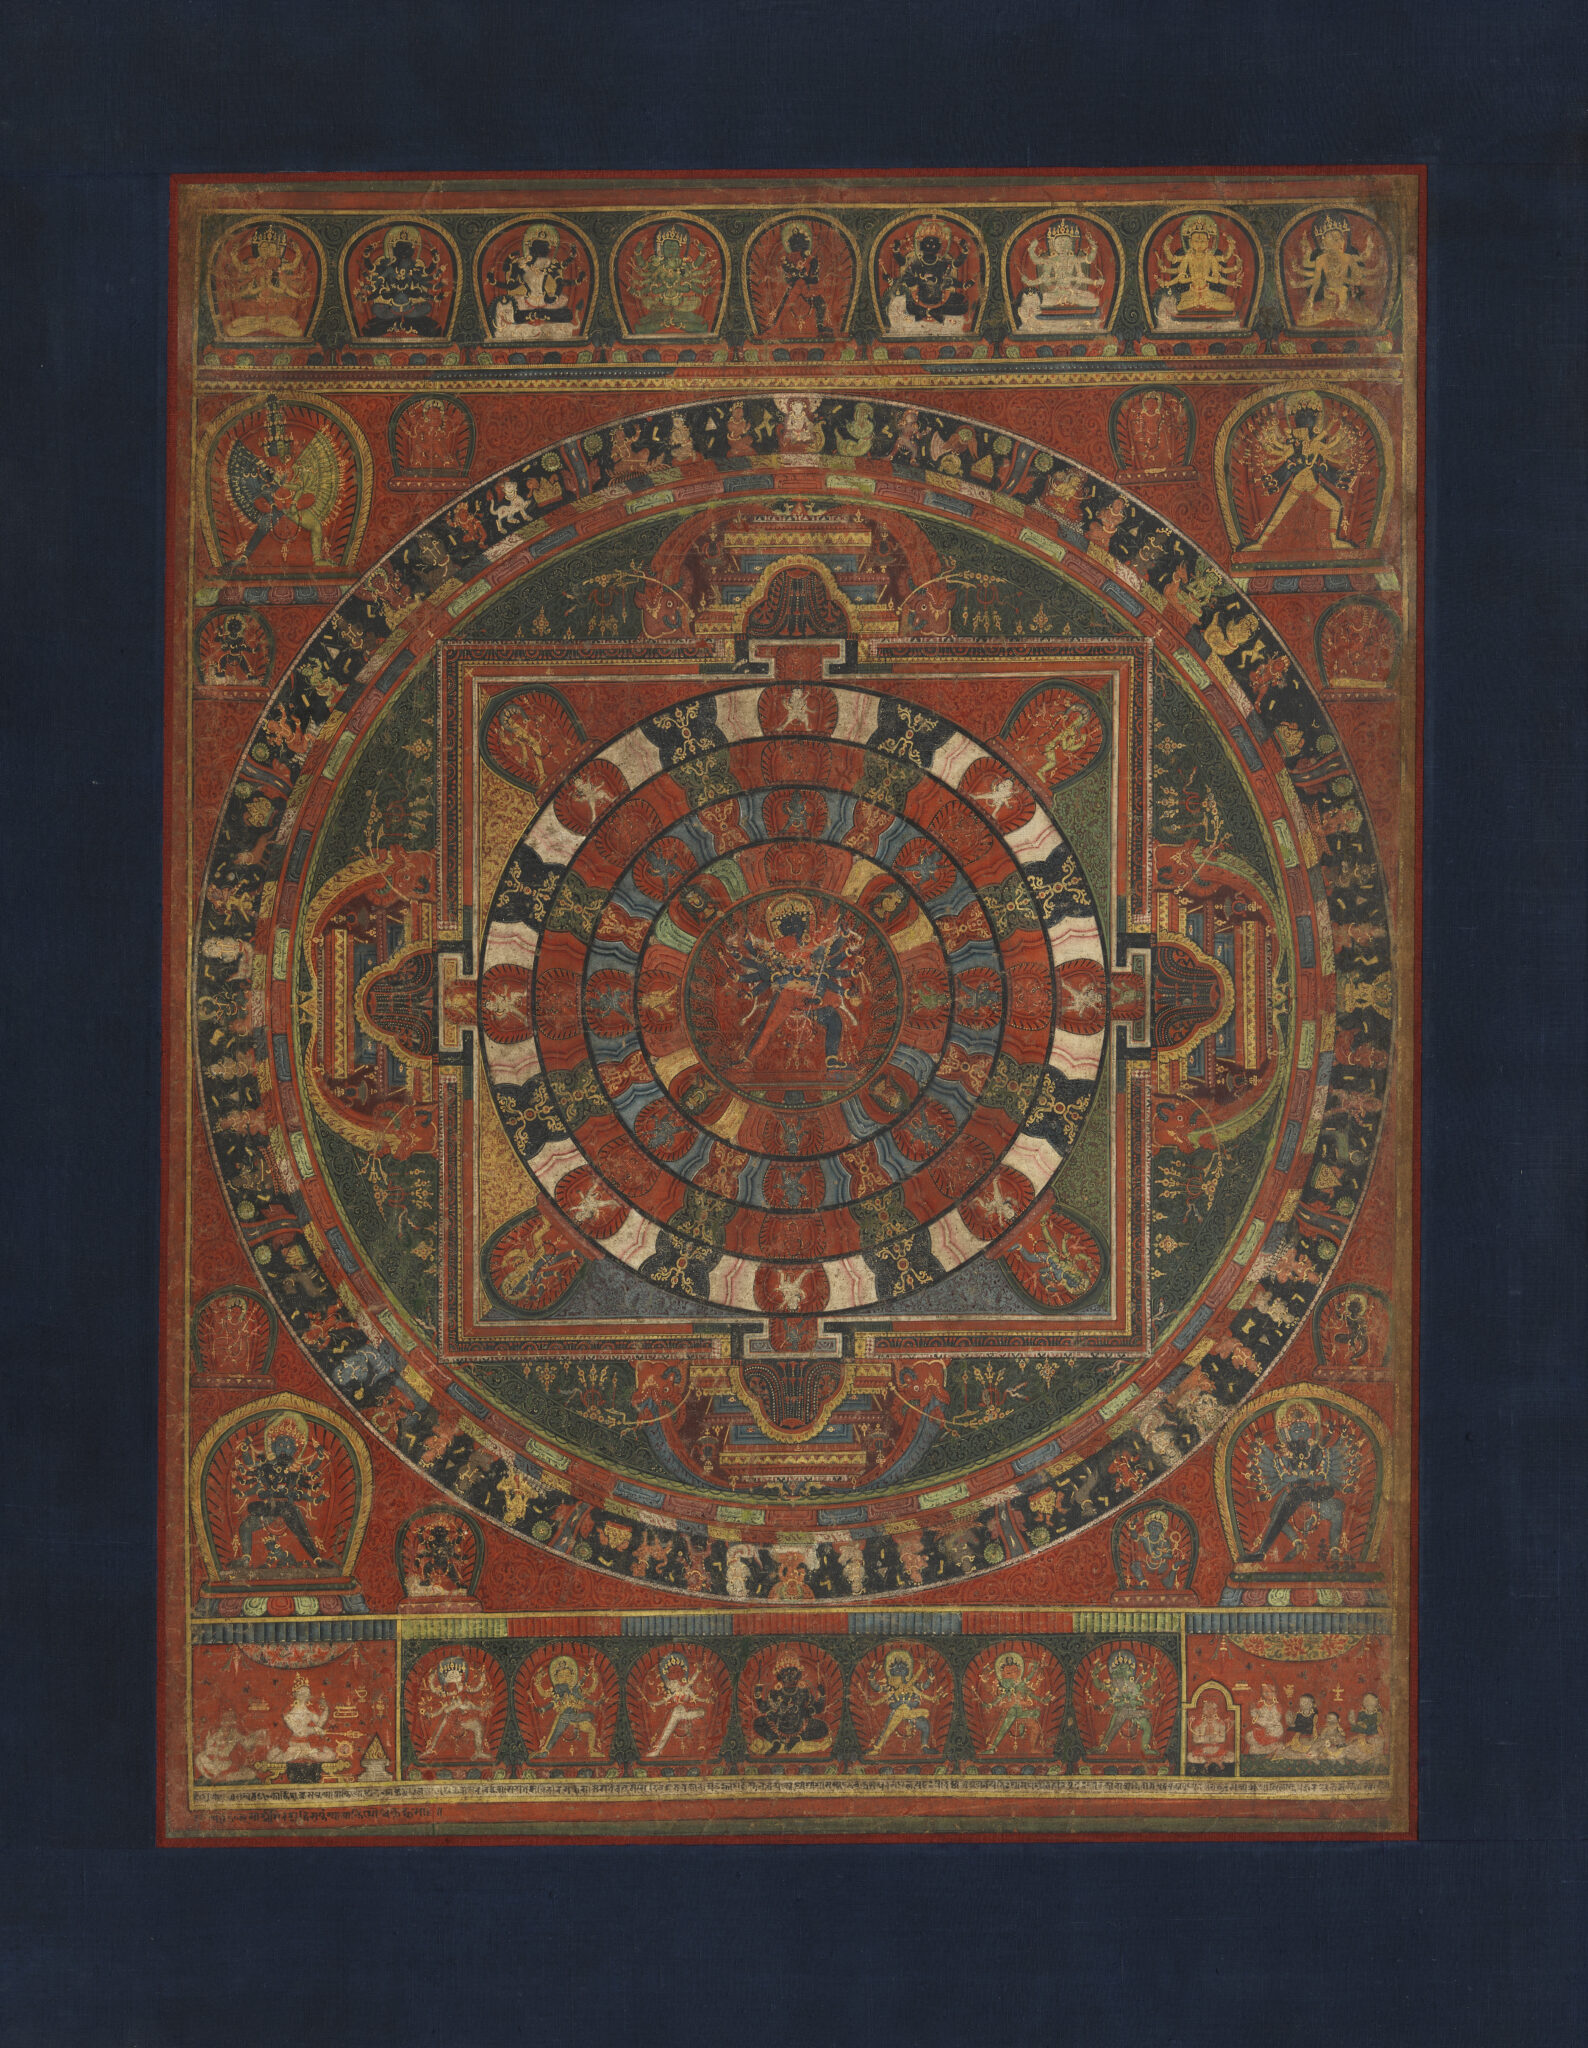 Sacred painting composed of geometric forms adorned with symbolic motifs; deep-red with accents in green, blue, yellow, and white